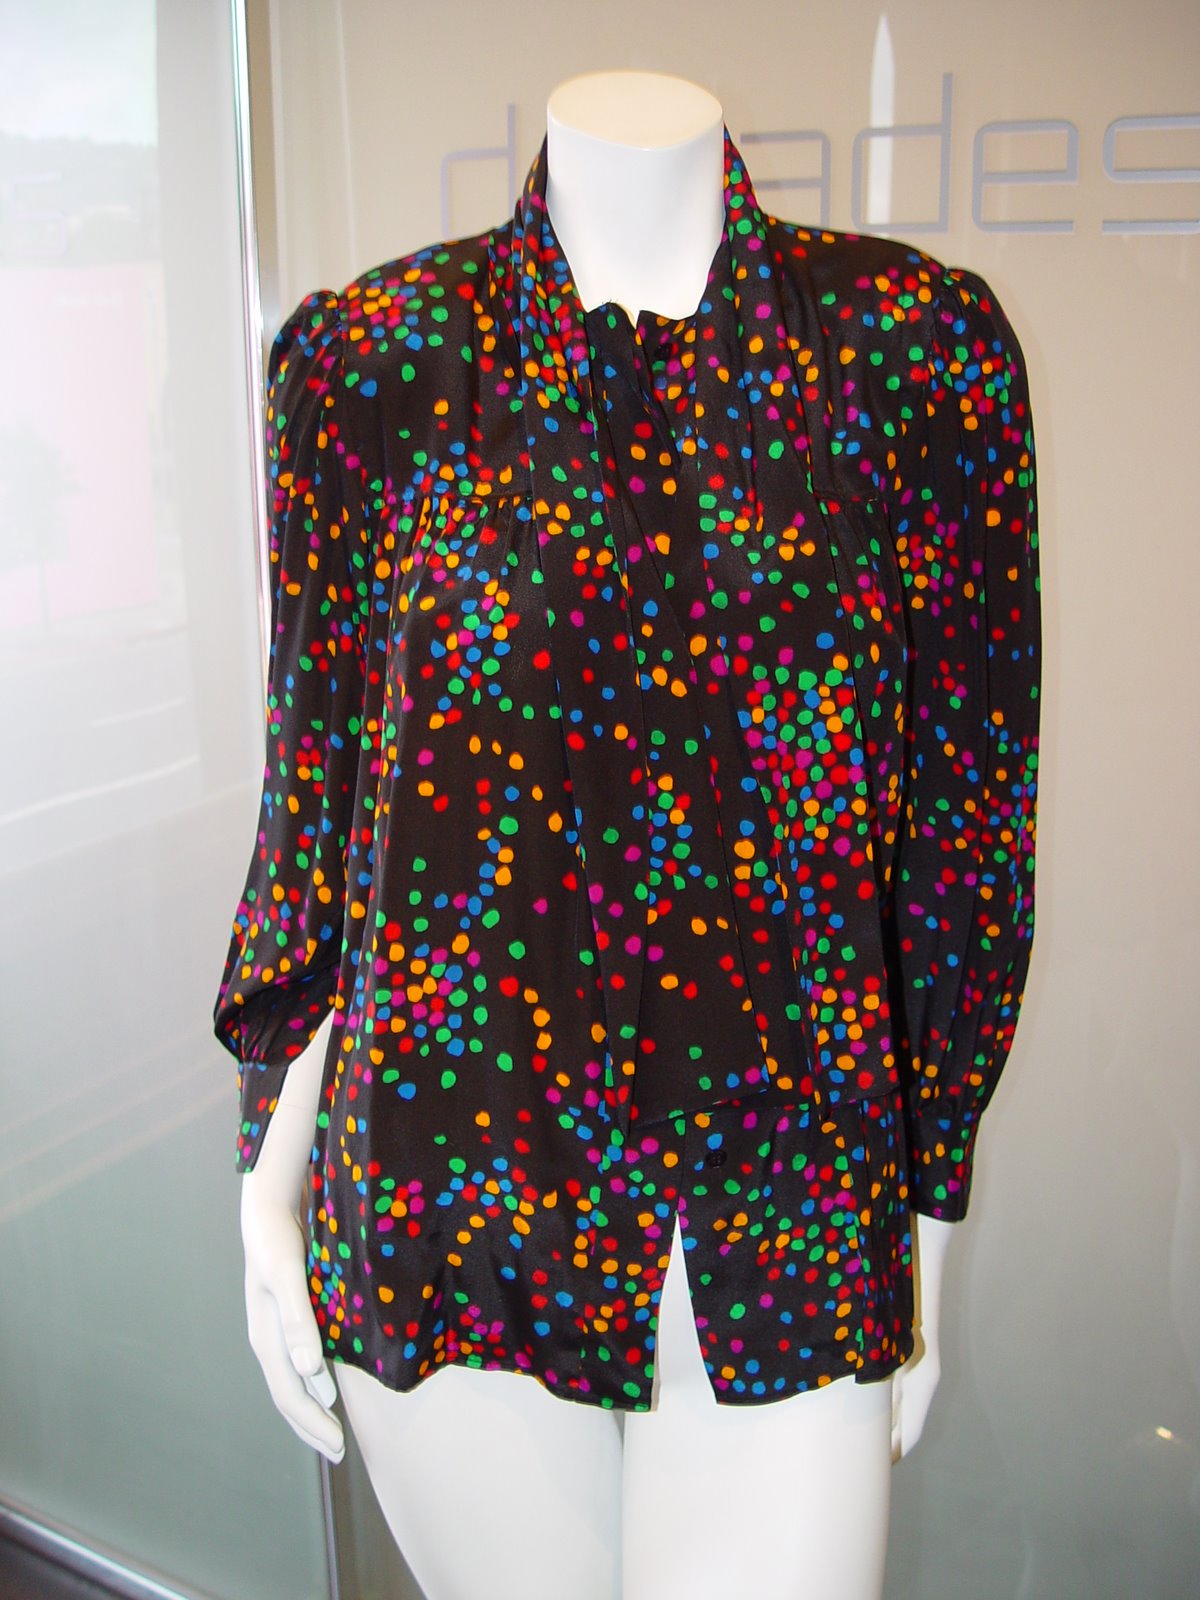 [YSL+RIVE+GAUCHE+BLACK+SILK+BLOUSE+WITH+OLIVE+BLUE+RED+WHITE+DOTS+C+80S+KEY+HOLEMARKED+SIZE+34.JPG+(1).JPG]